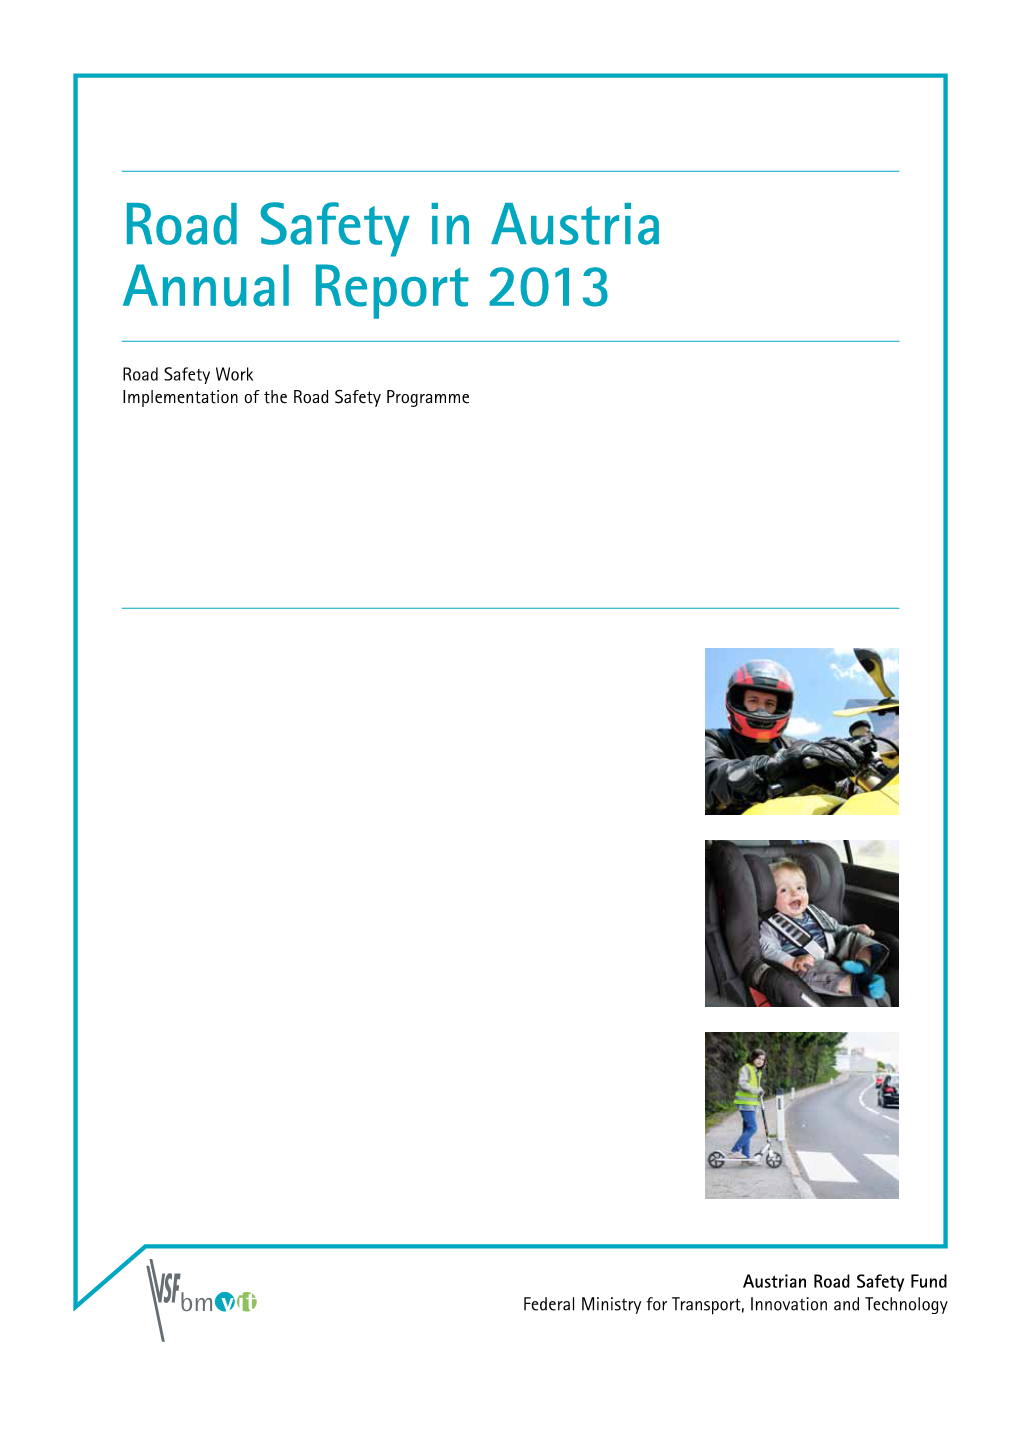 Road Safety in Austria Annual Report 2013